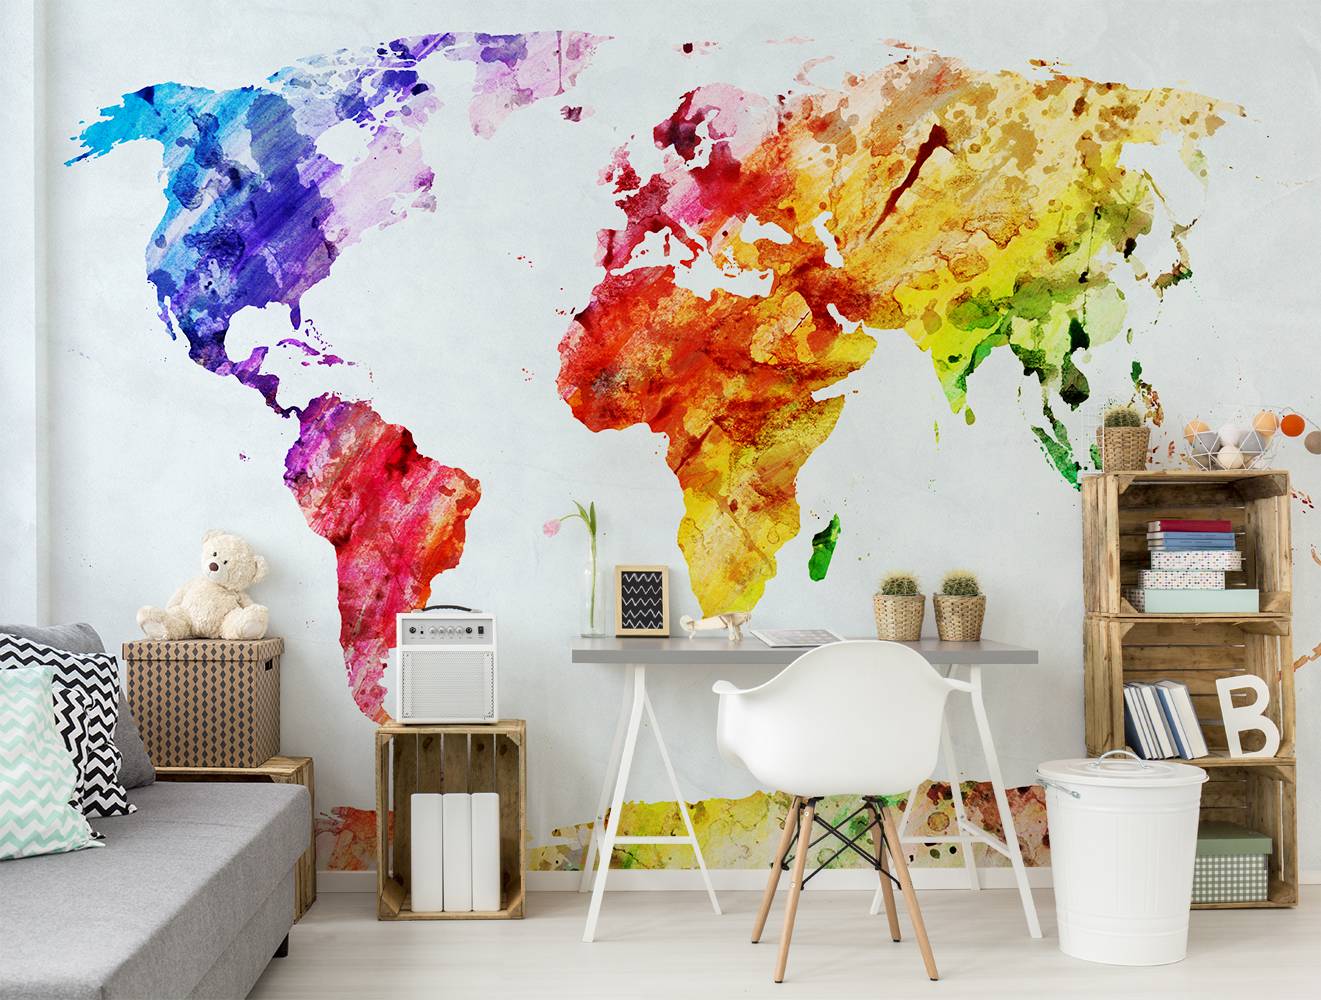 In travel • Contemporary - Teenager's room - Wall Murals - Maps and flags